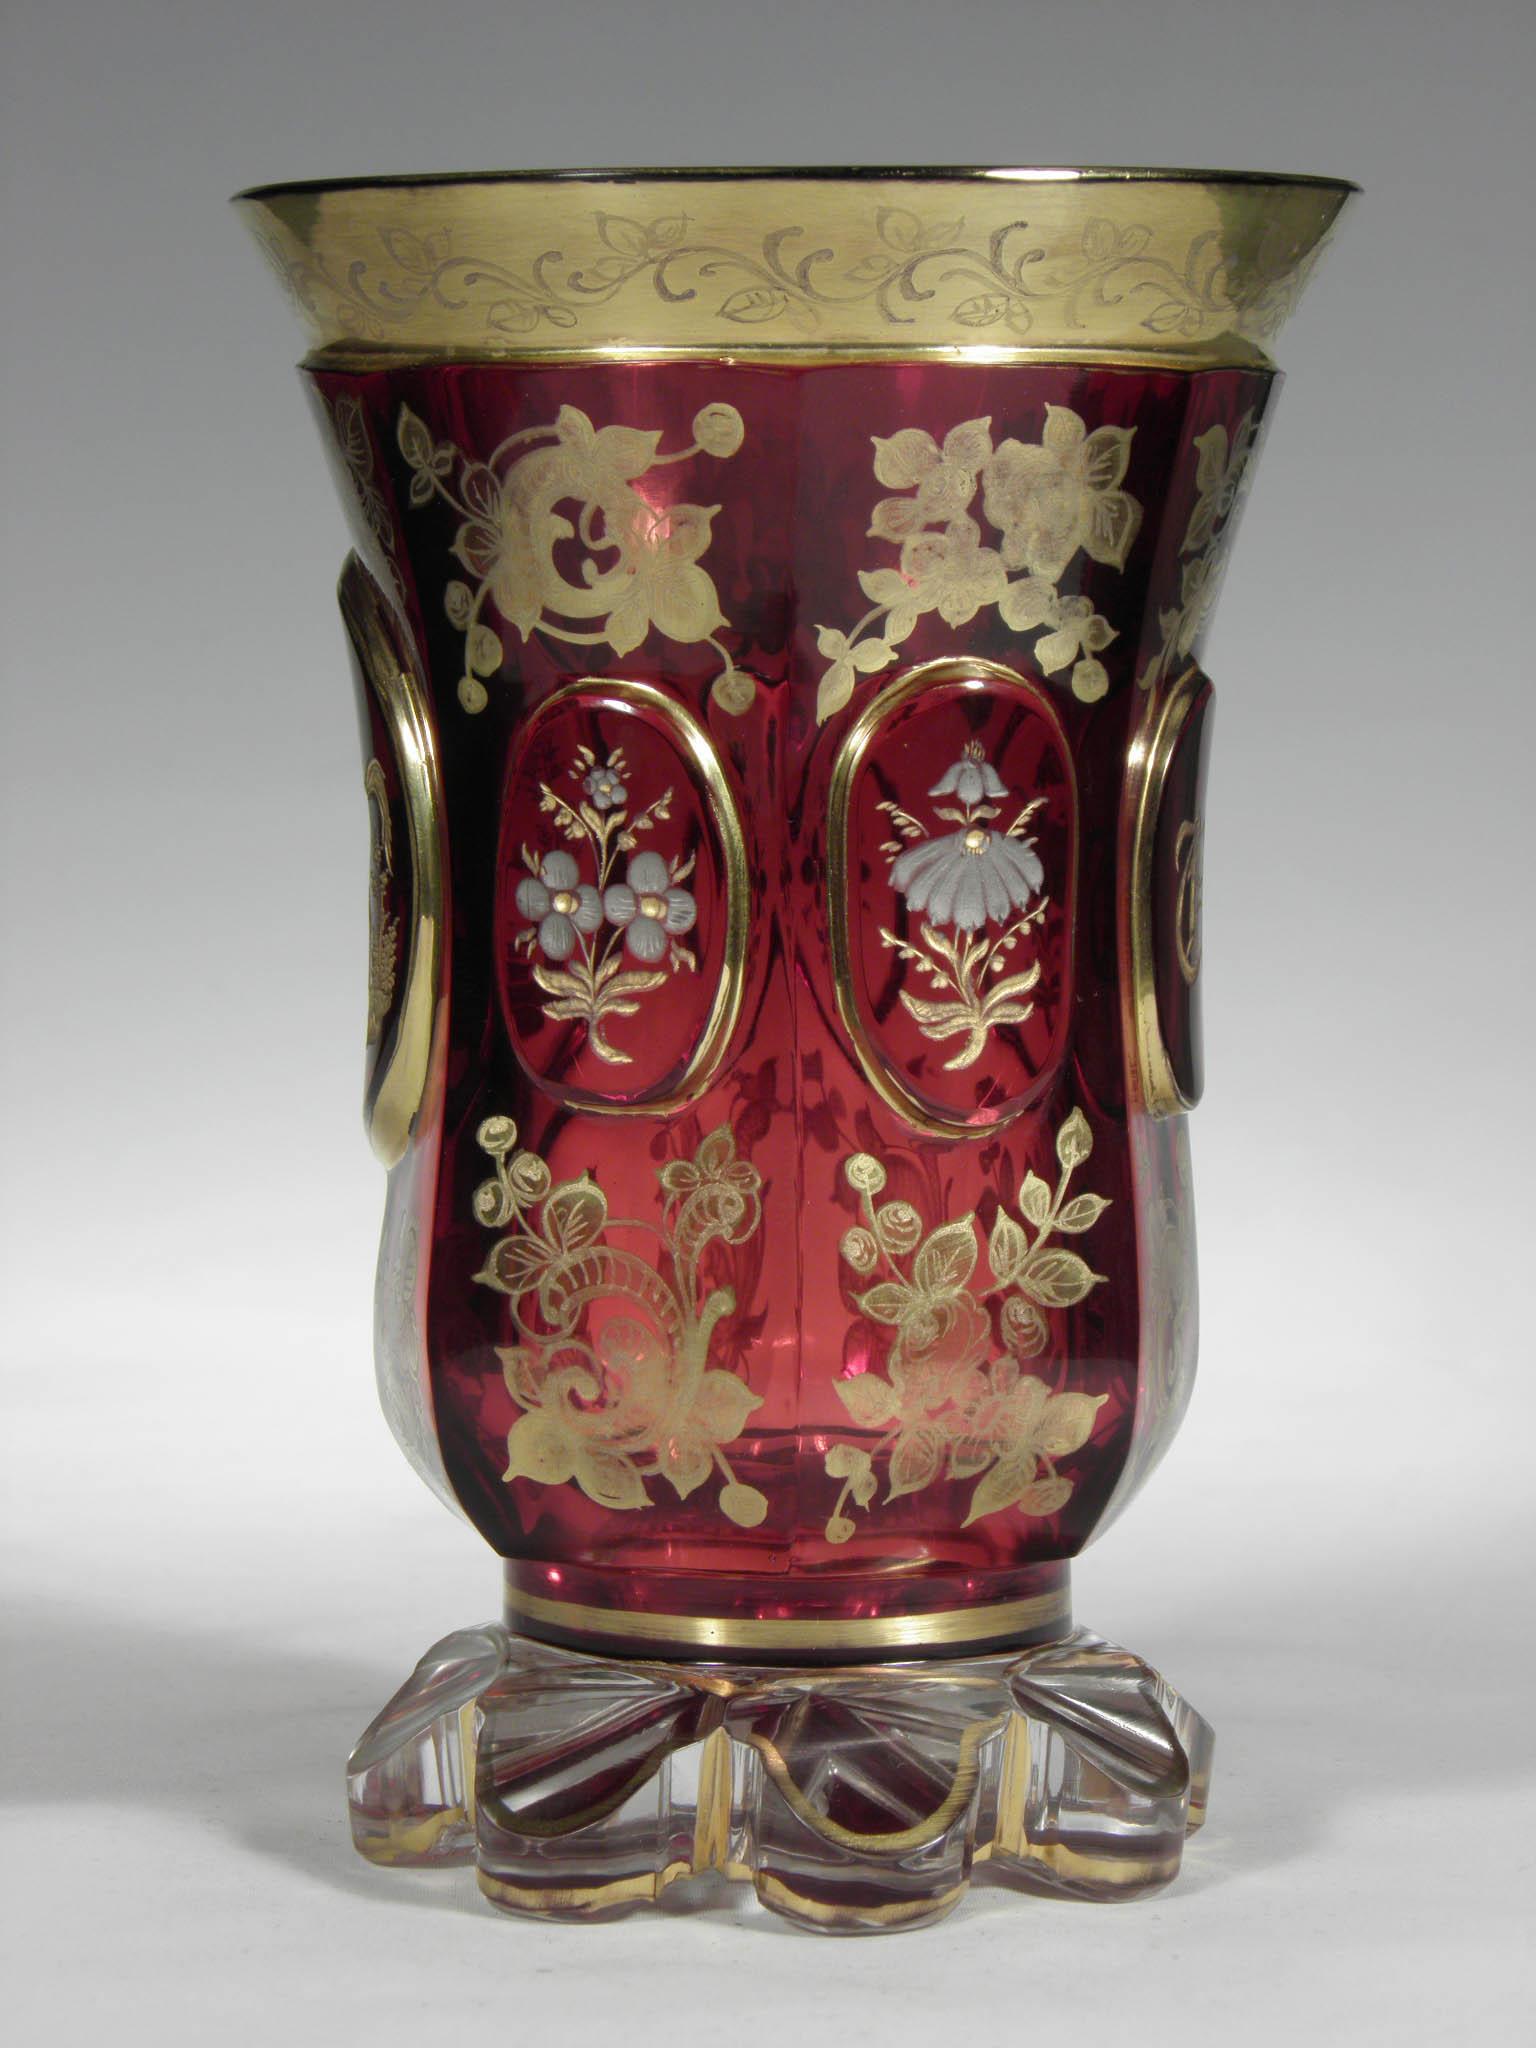 The goblet is hand cut, gilded engraved horse, gilded and silver flowers and gold painting. Ruby glass is rarer, due to the fact that it was stained with gold to have a beautiful red hue, hence the name golden ruby. The cup is in very good